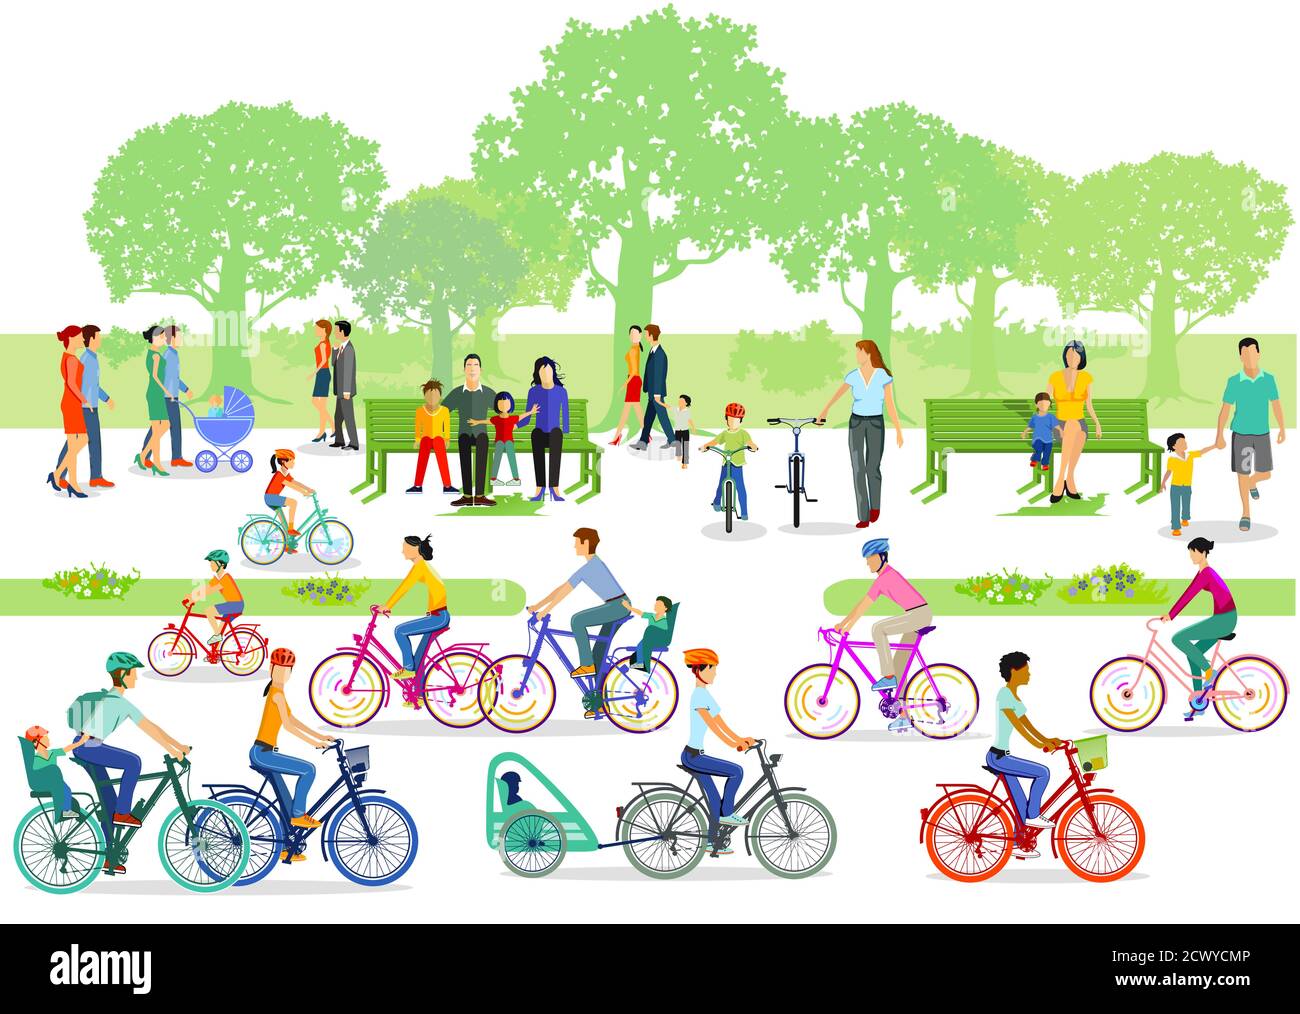 Cyclists and pedestrians in the park Stock Vector